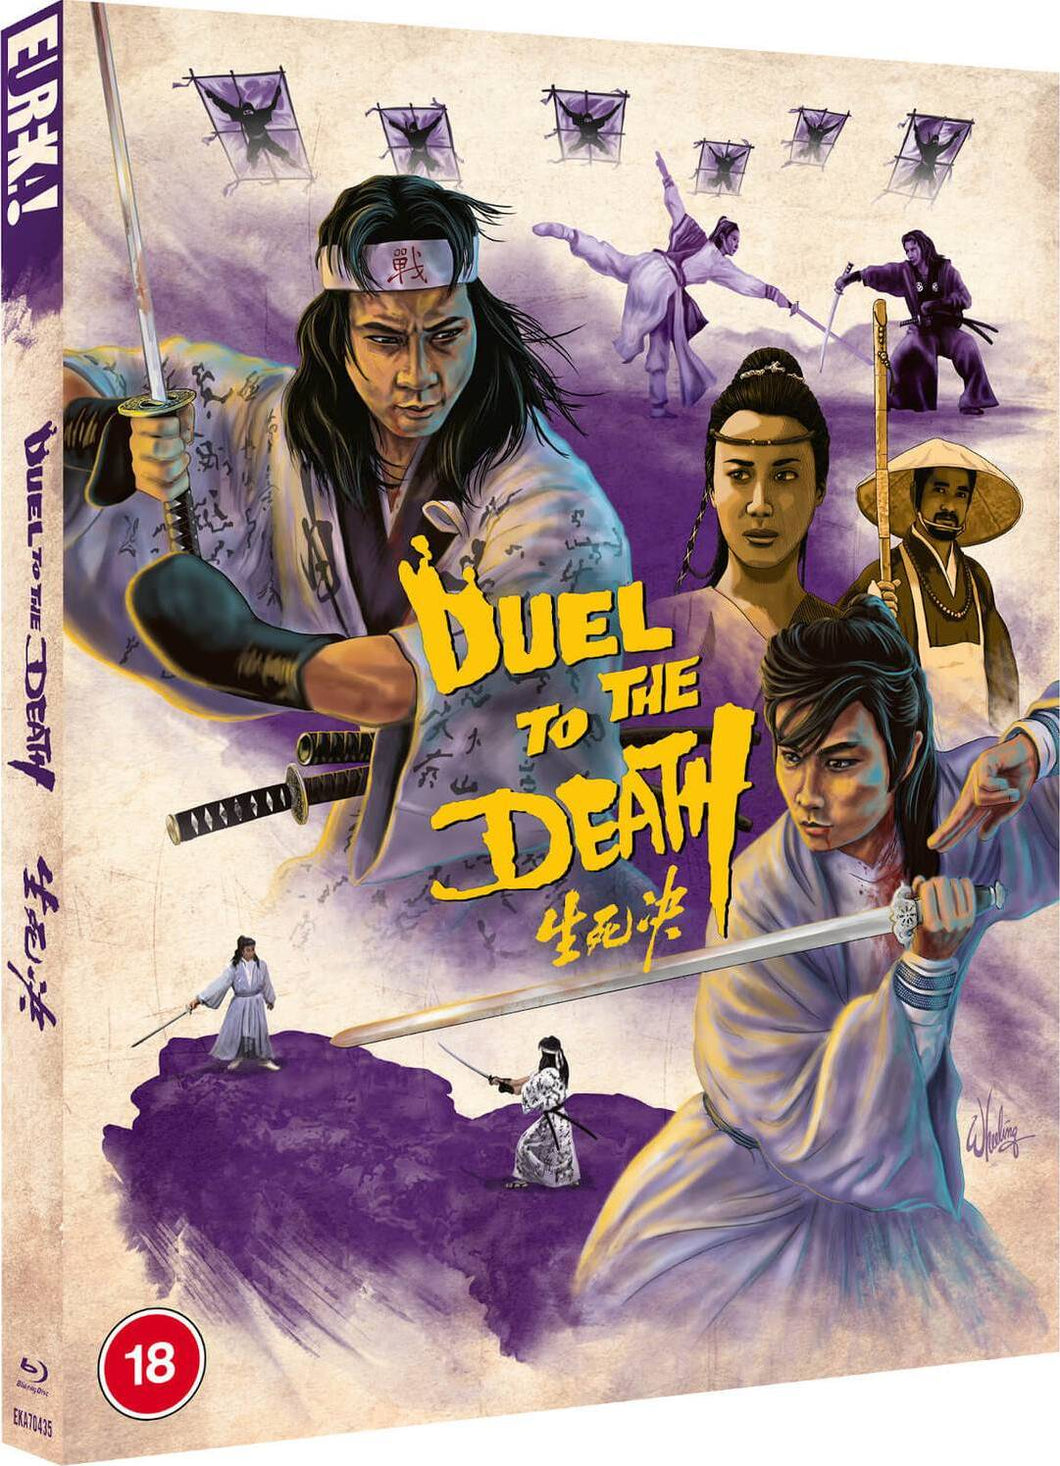 Duel to the Death (1983) de Siu-Tung Ching  - front cover